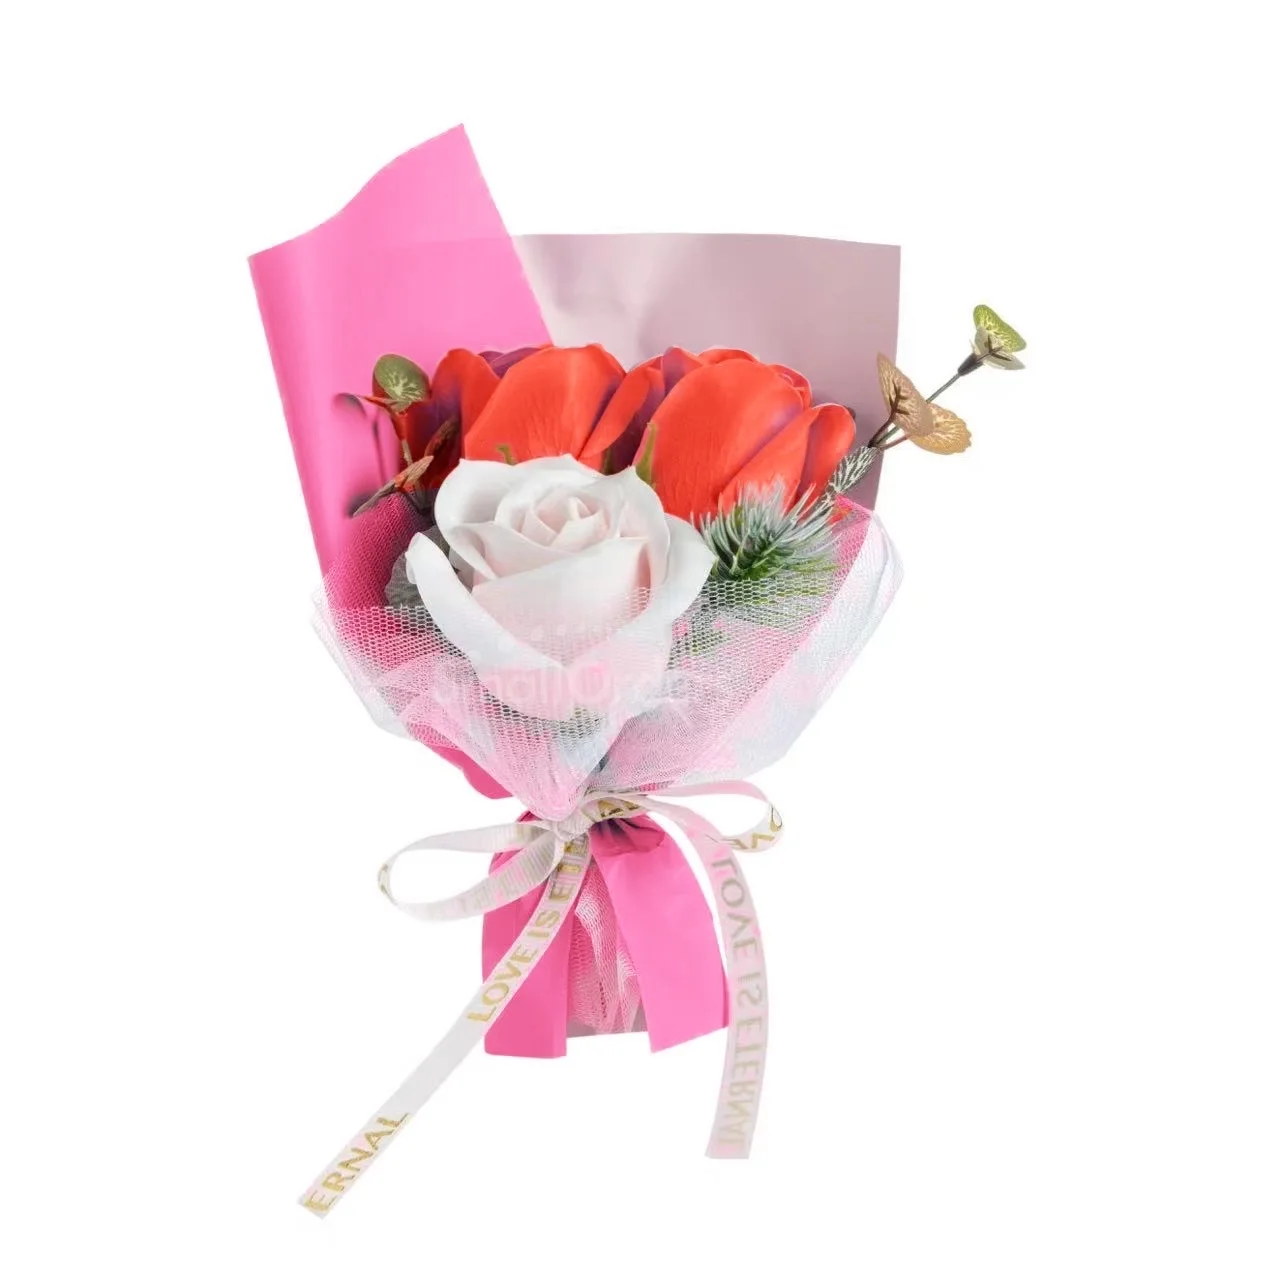 Promotional Wedding Birthday Valentine's Day Gift Set Preserved New Flowers for Women Party Supplies